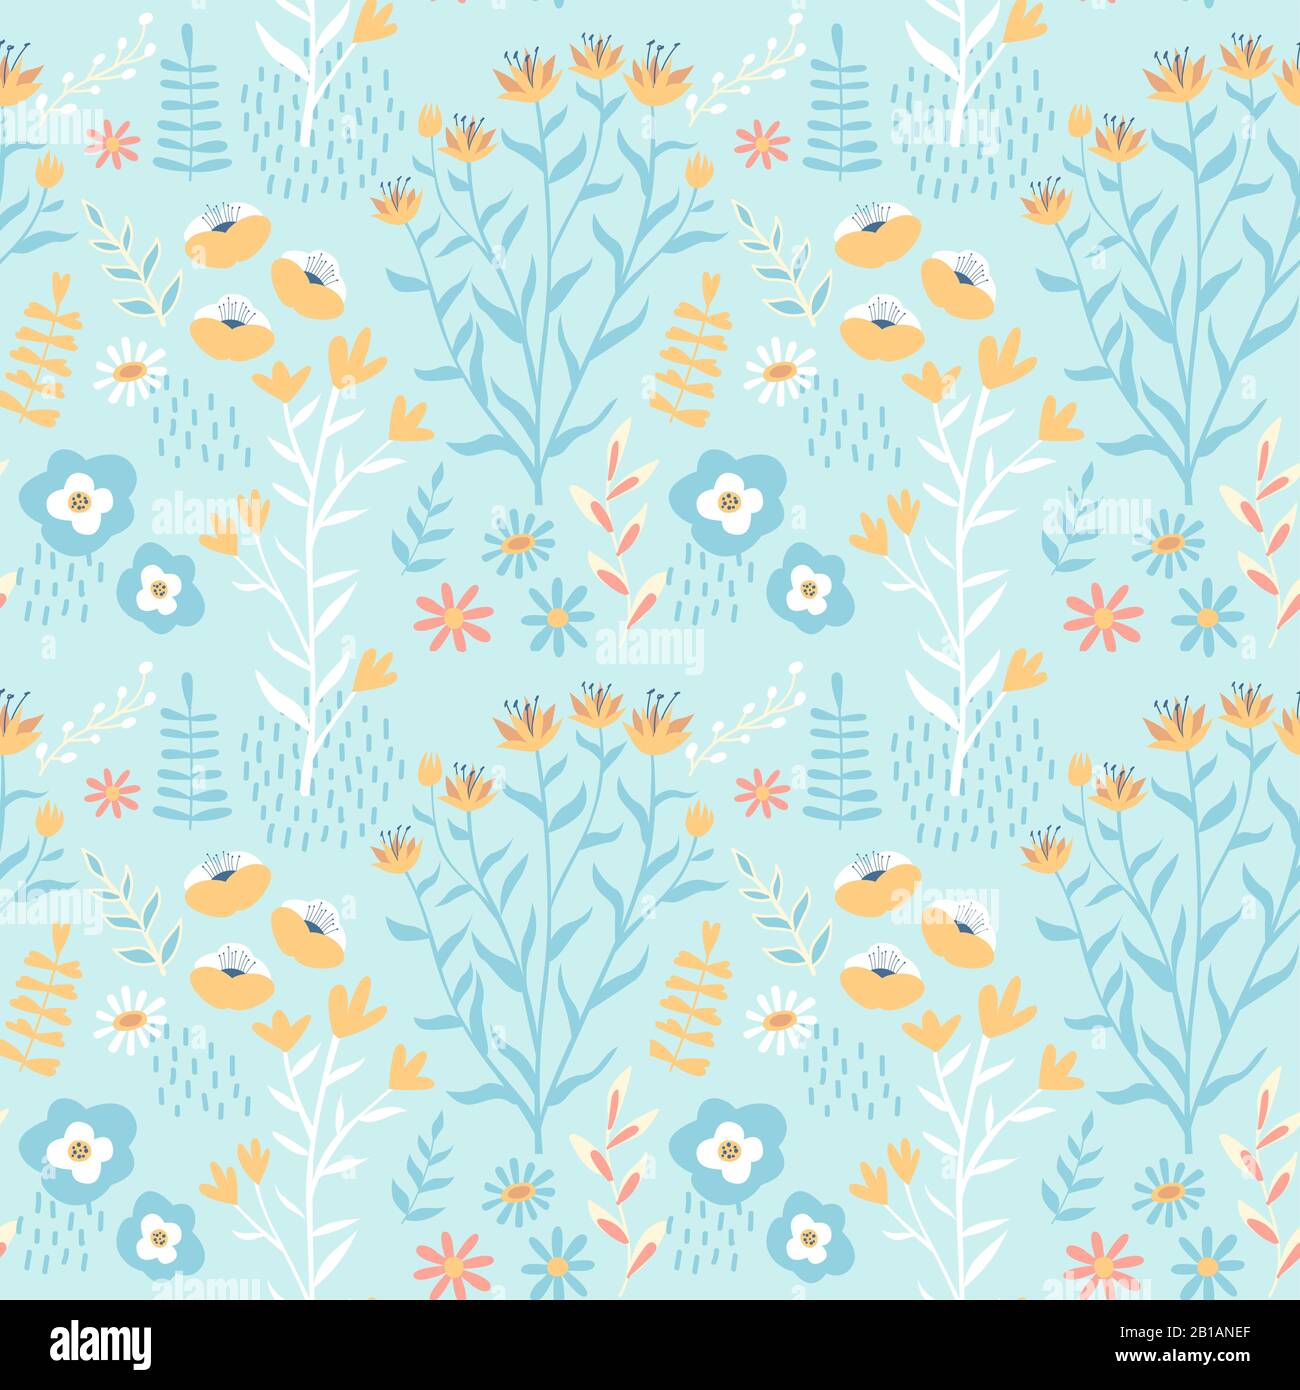 Cute spring flower seamless pattern with beautiful hand drawn wild floral decoration on isolated background. Romantic season wallpaper illustration. Stock Vector